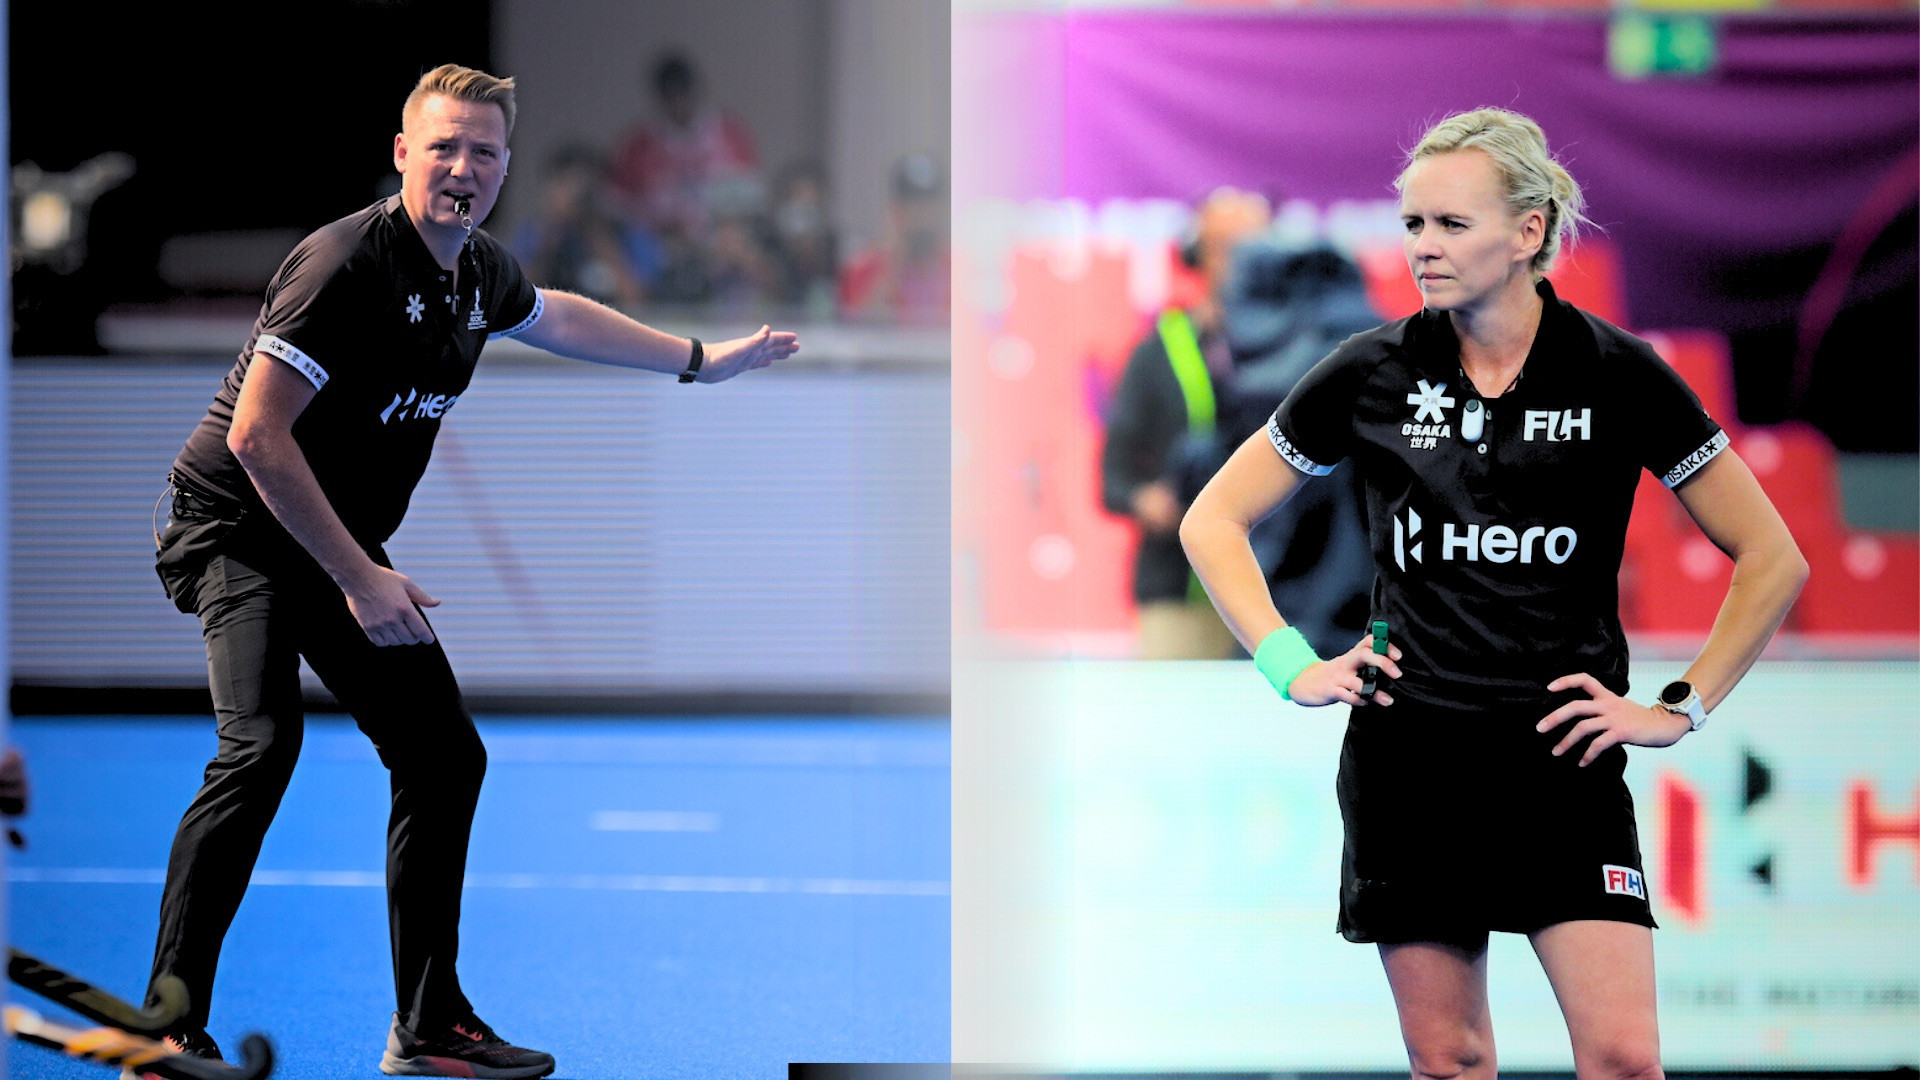 The FIH has named a gender equal team of officials for Paris 2024 ©FIH